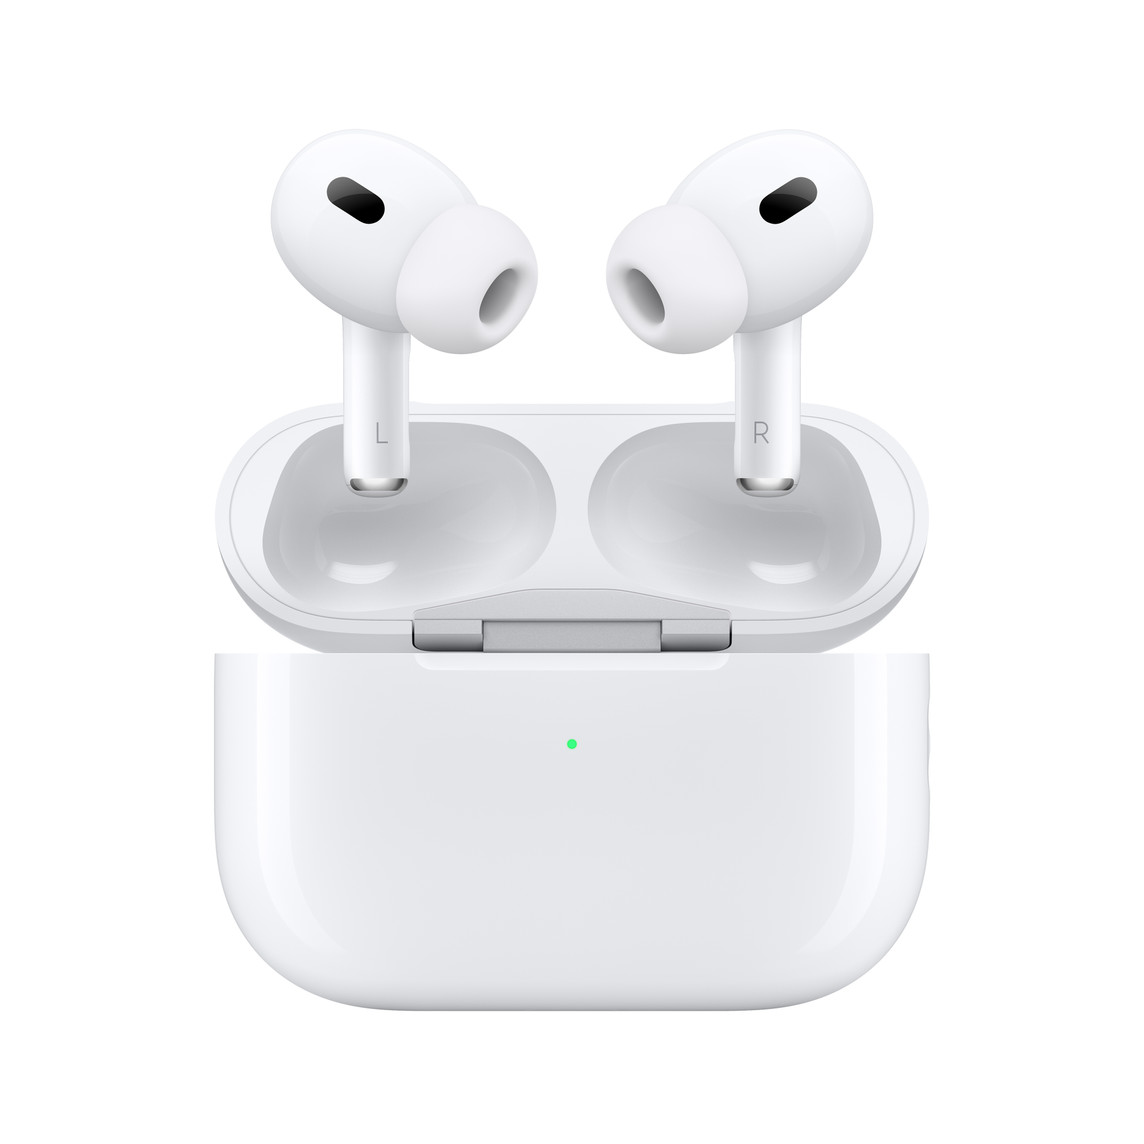 All white AirPods Pro. 